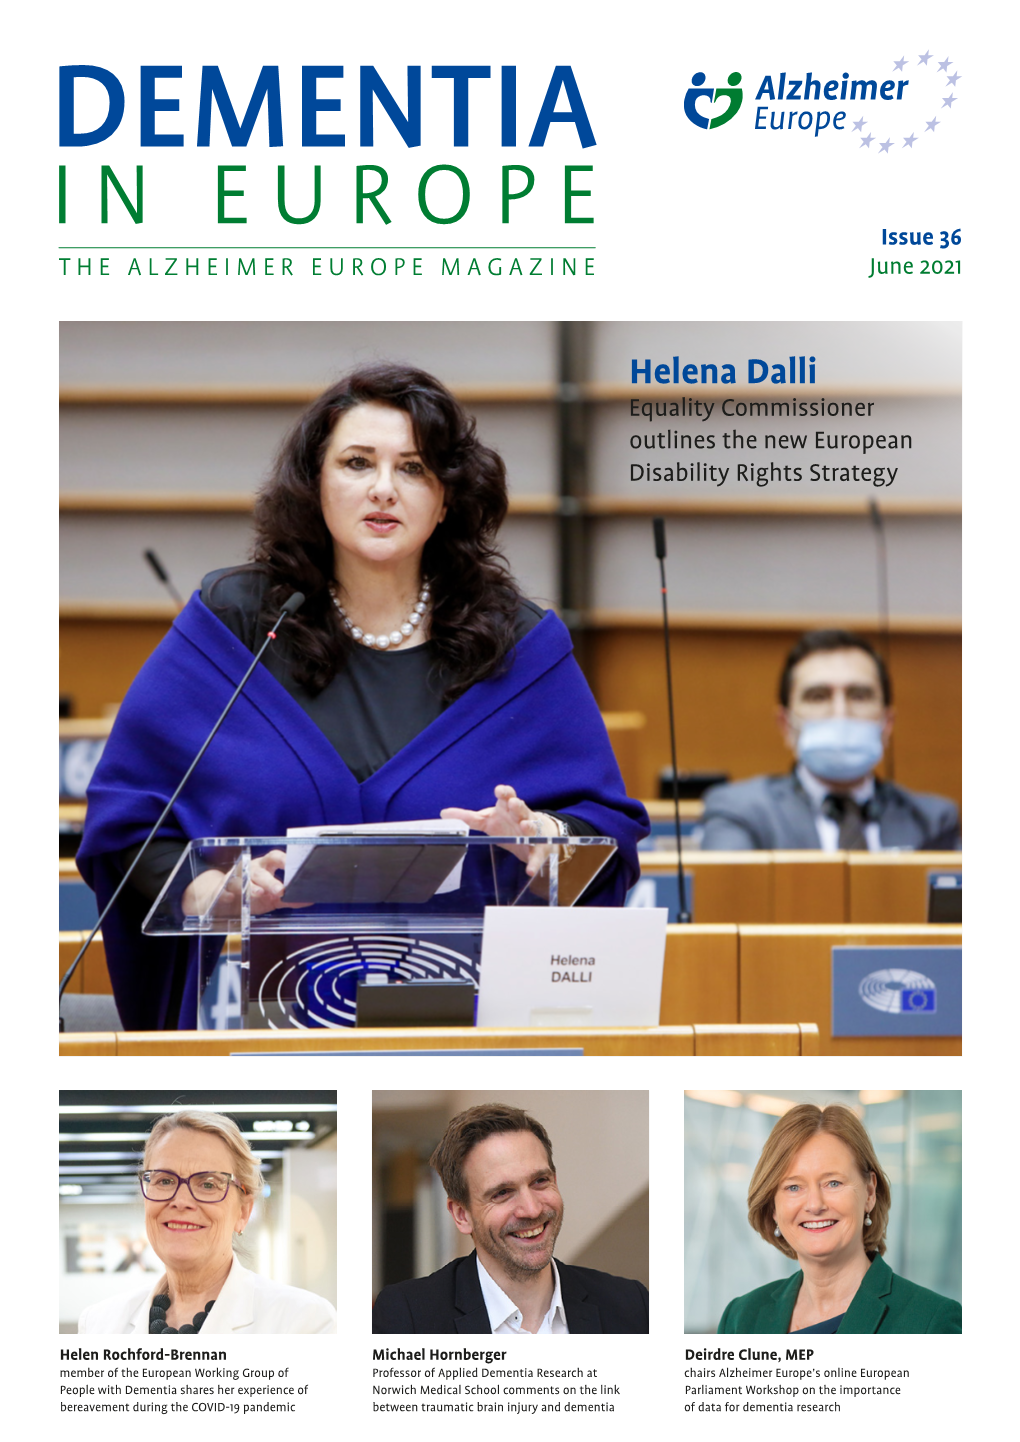 Helena Dalli Equality Commissioner Outlines the New European Disability Rights Strategy